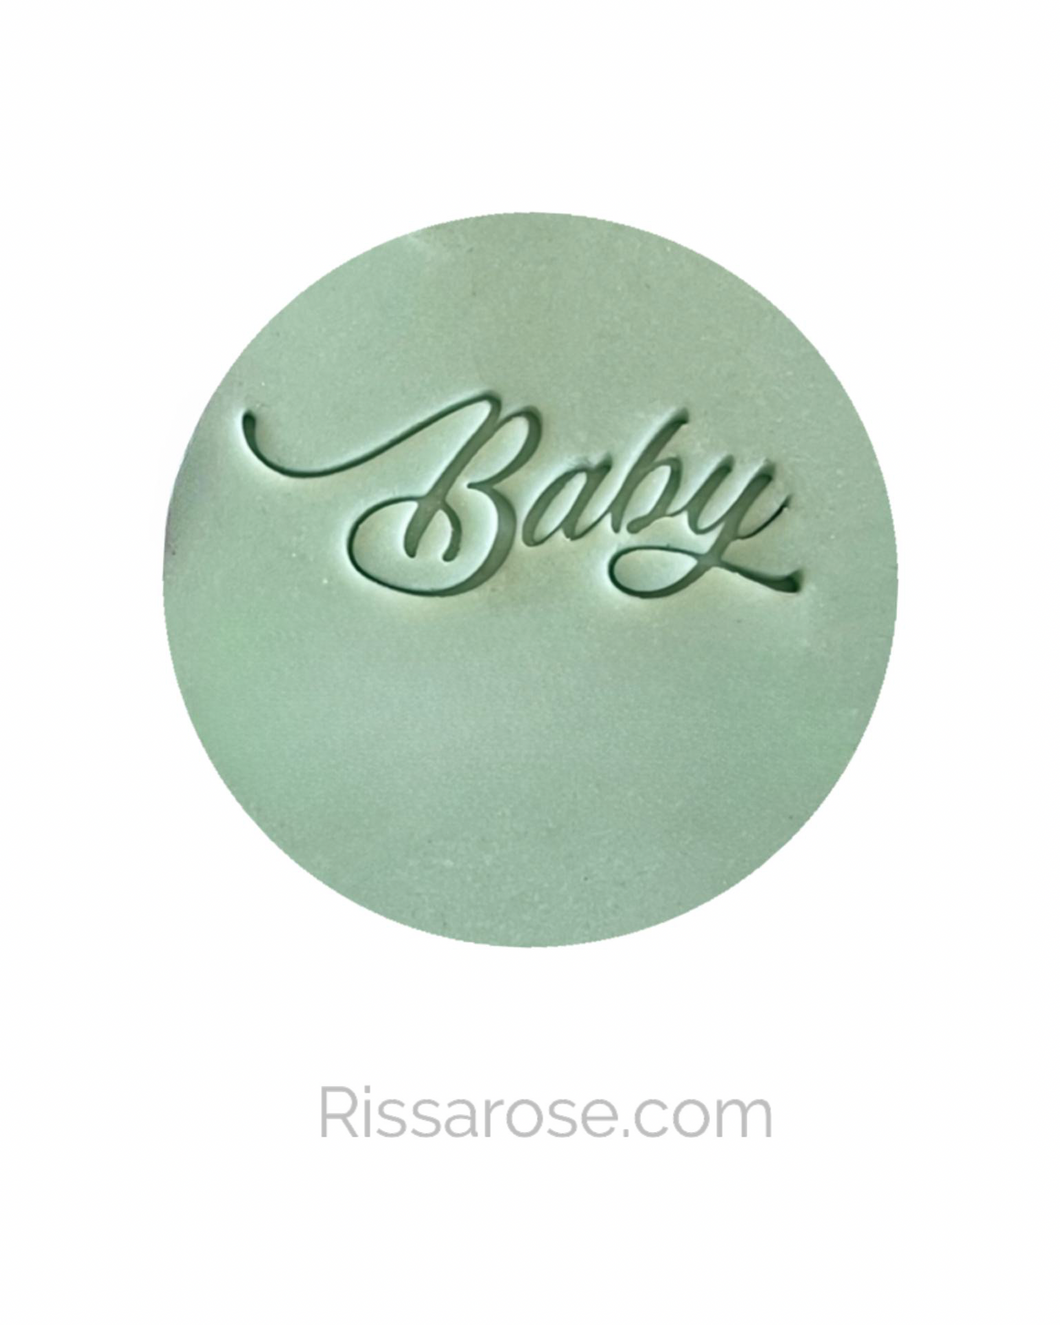 Baby shower Cookie Stamp - Personalized Baby shower Gift